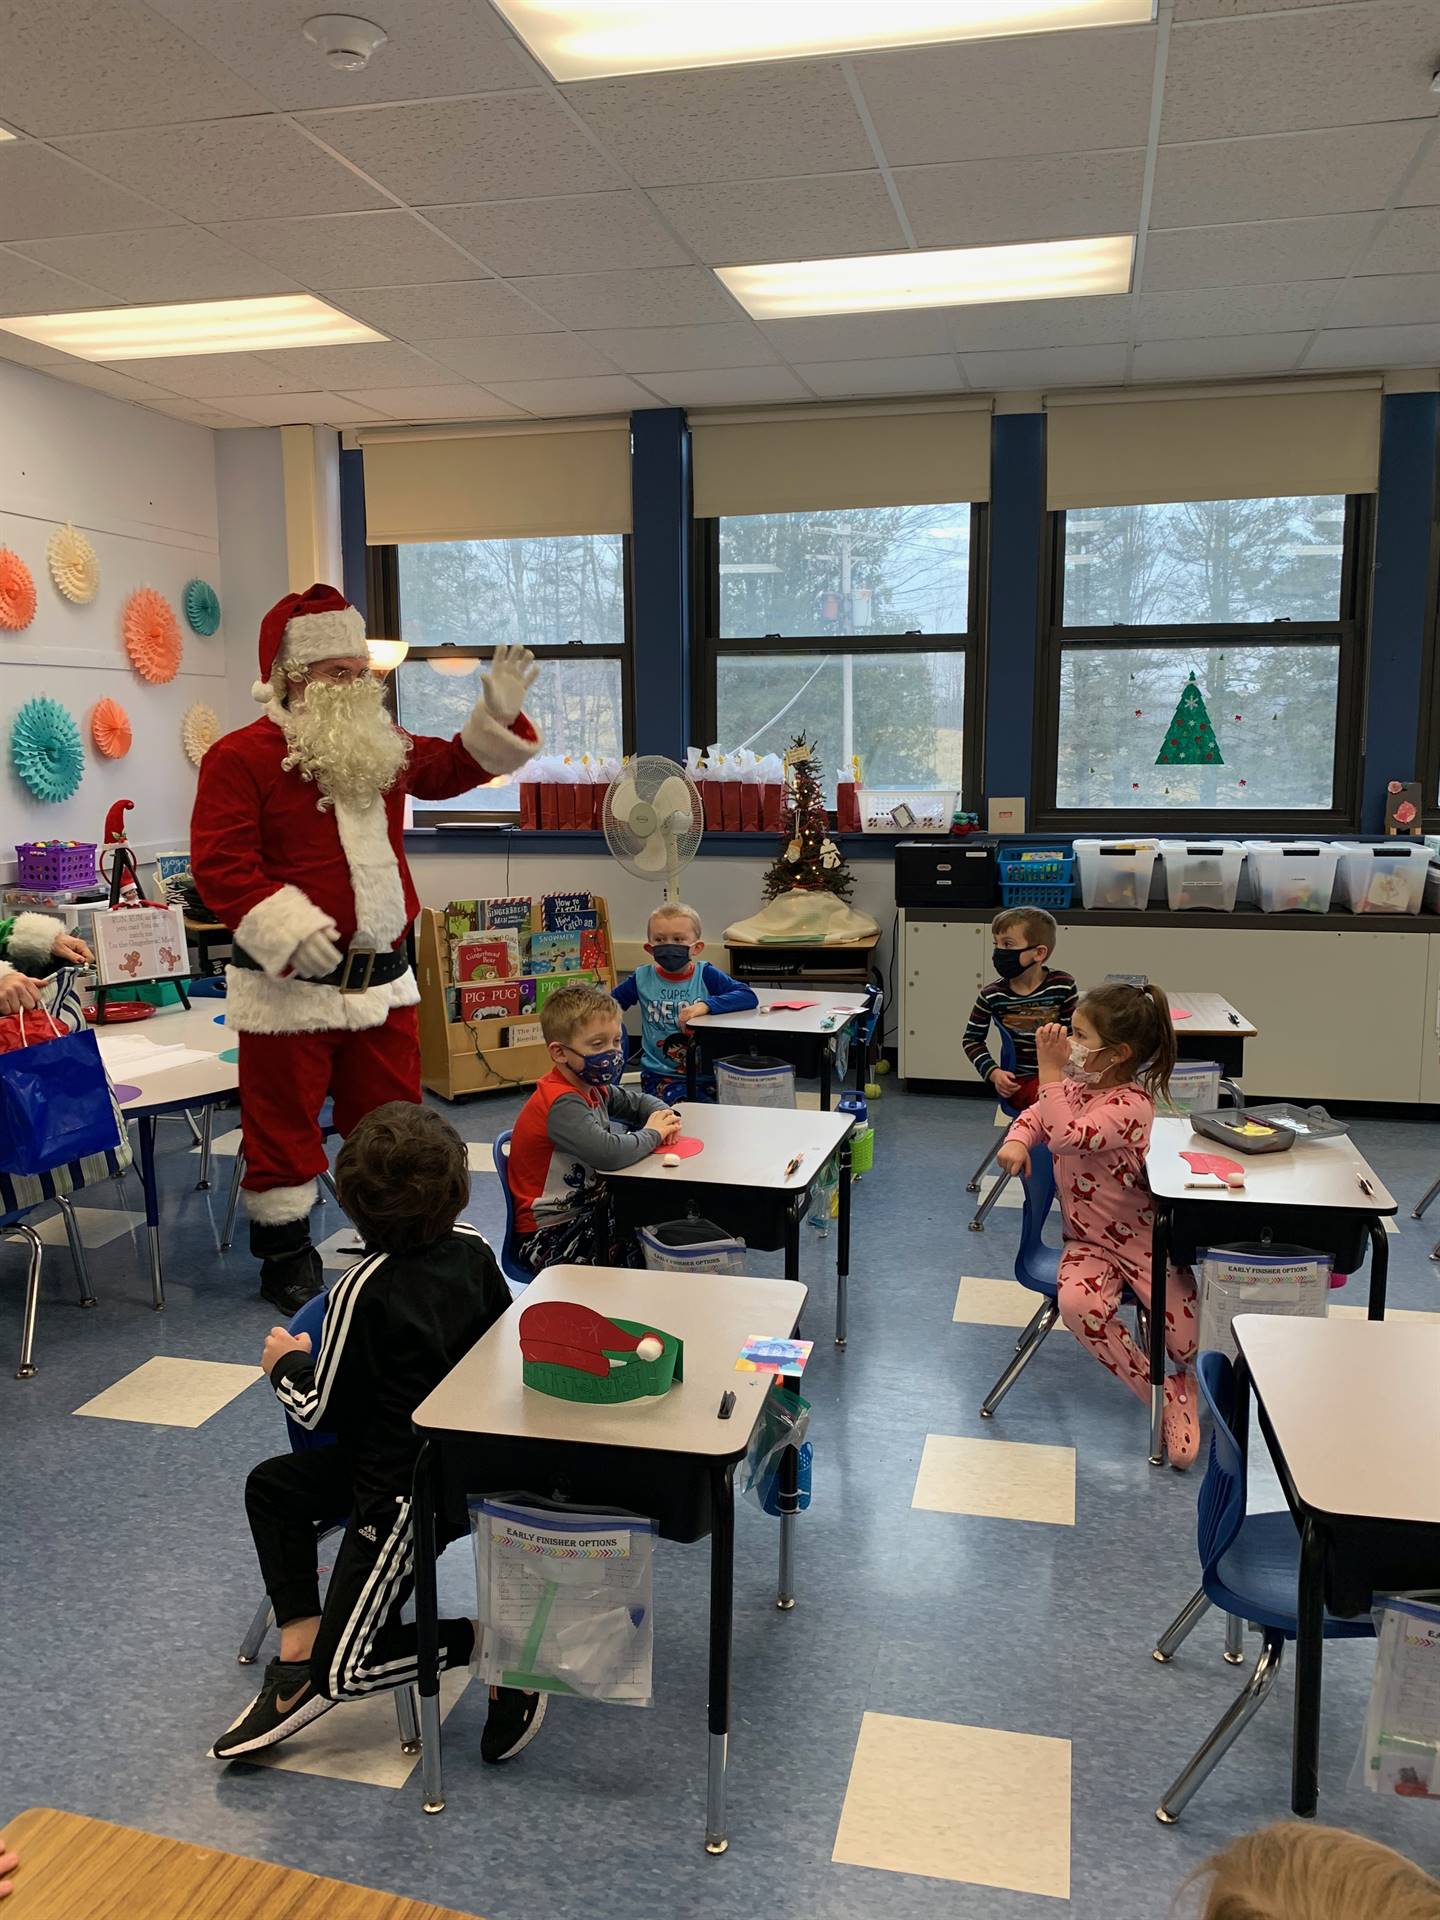 Santa waves to a class of students!